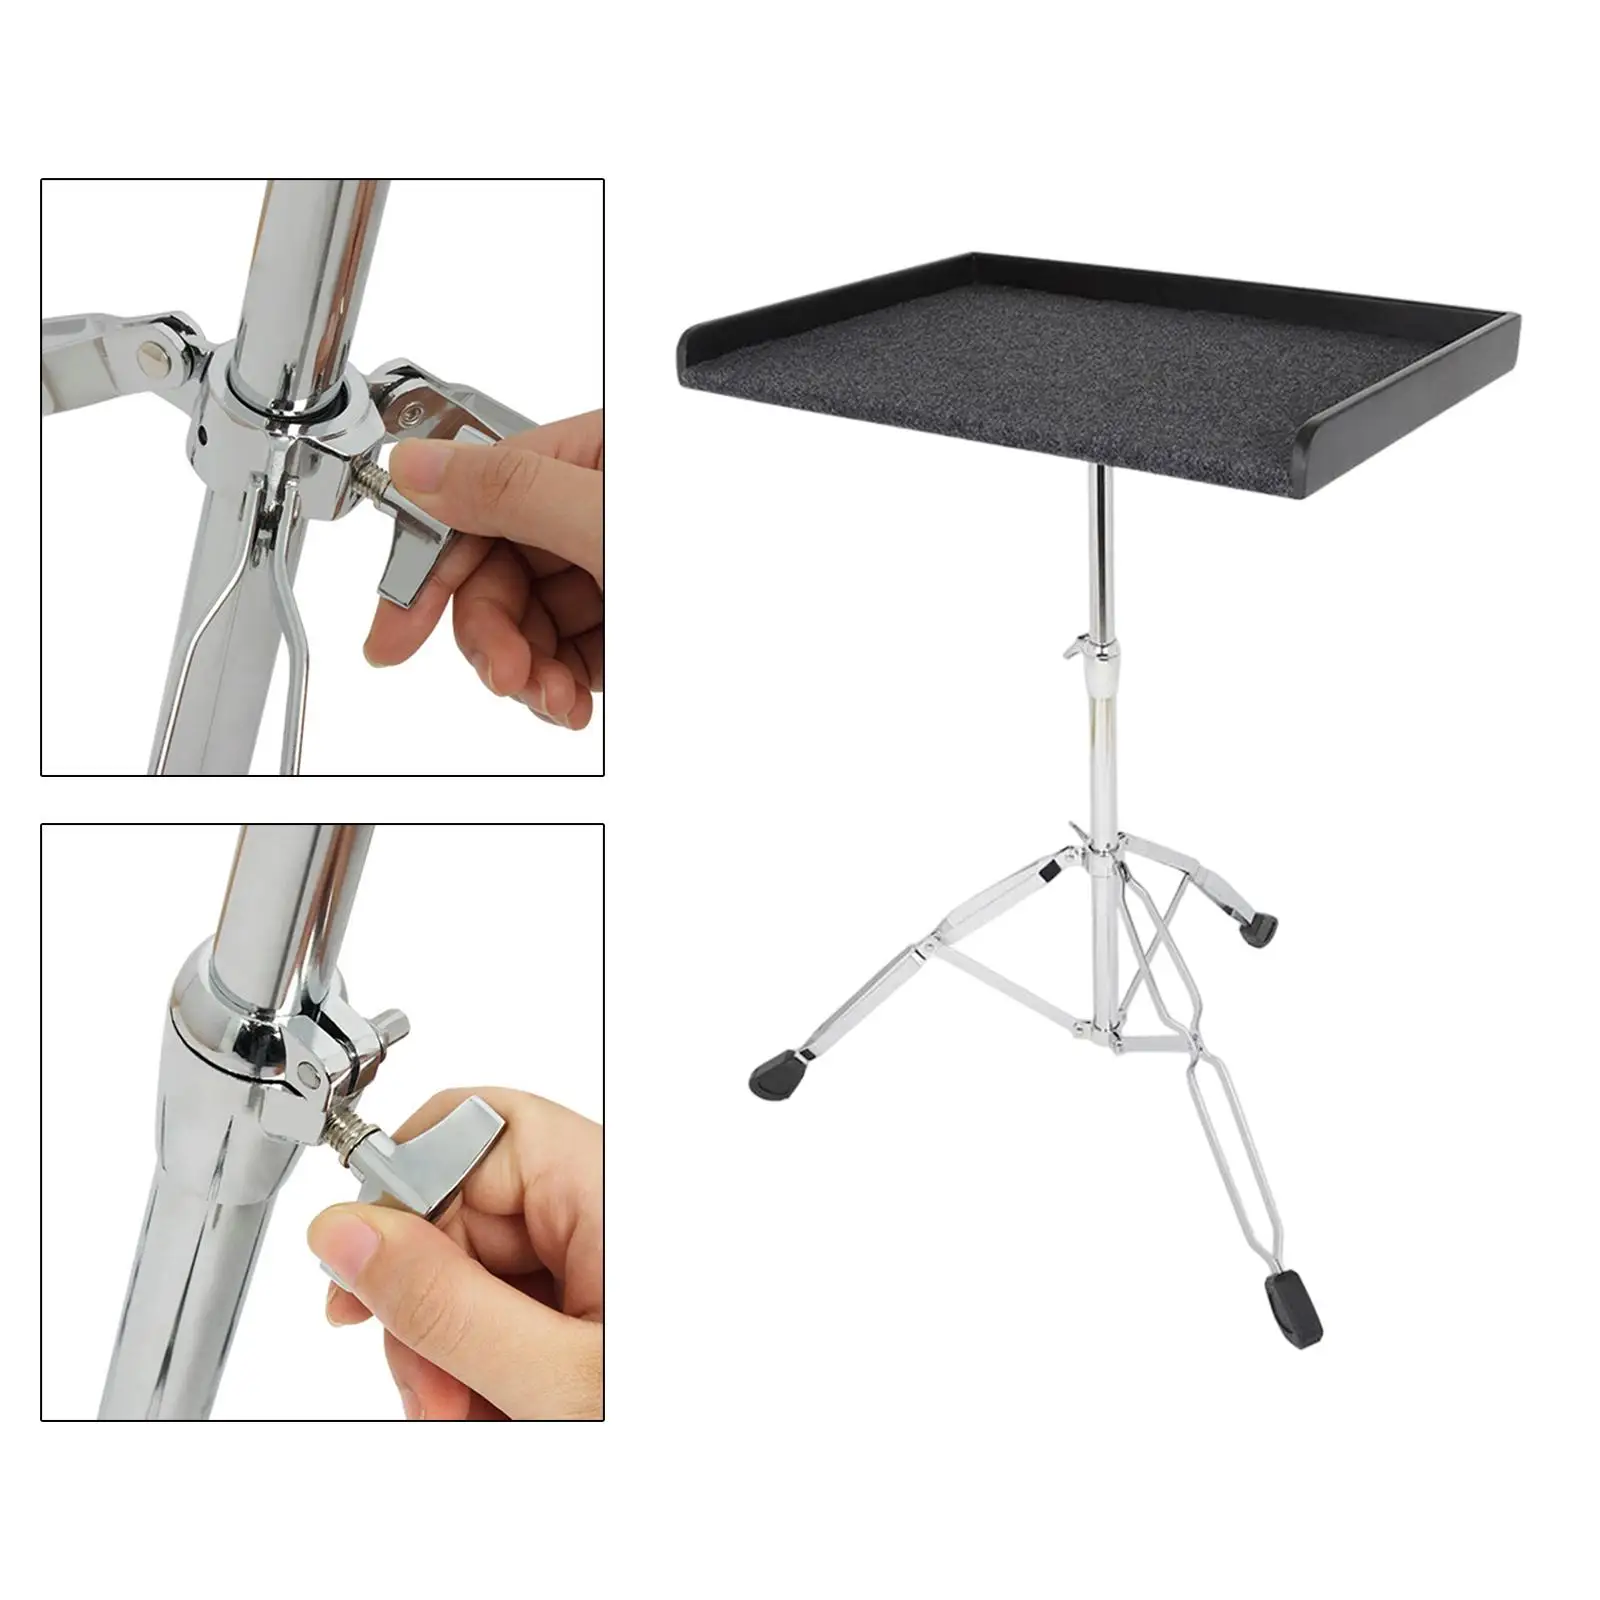 Professional Percussion Table Mount Holder Adjustable Thick EVA Padded Drum